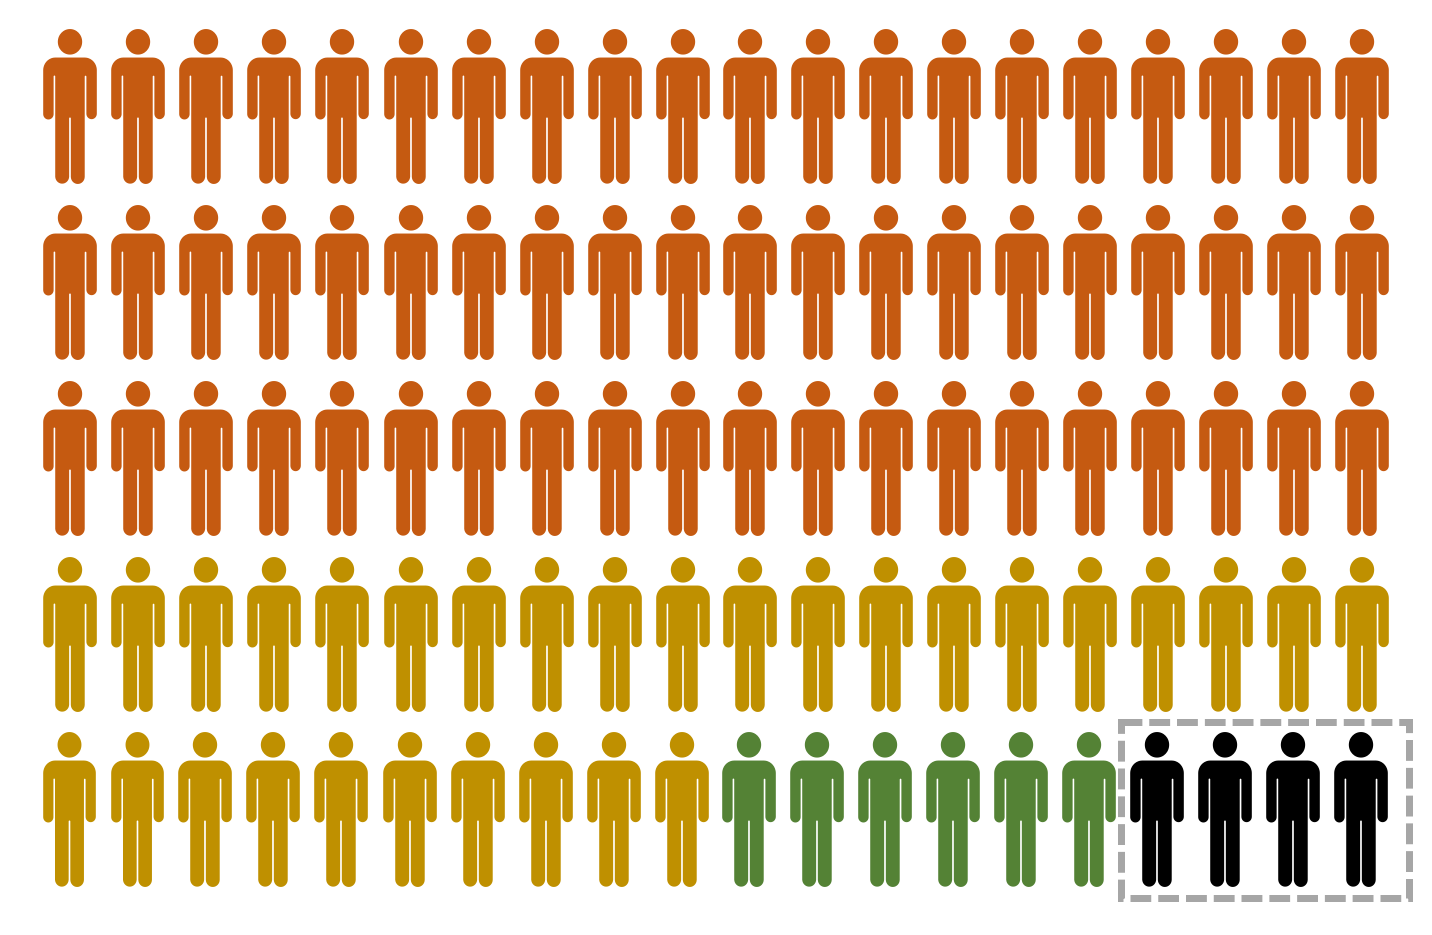 Figure 1. Census pictograph based on grade distribution data from Virginia Tech’s Composition Program. Five rows each contain 20 human-like forms color-coded to indicate the percentile in each grade range, based on the data in Table 2. Four figures are outlined to designate the DFWI subset.